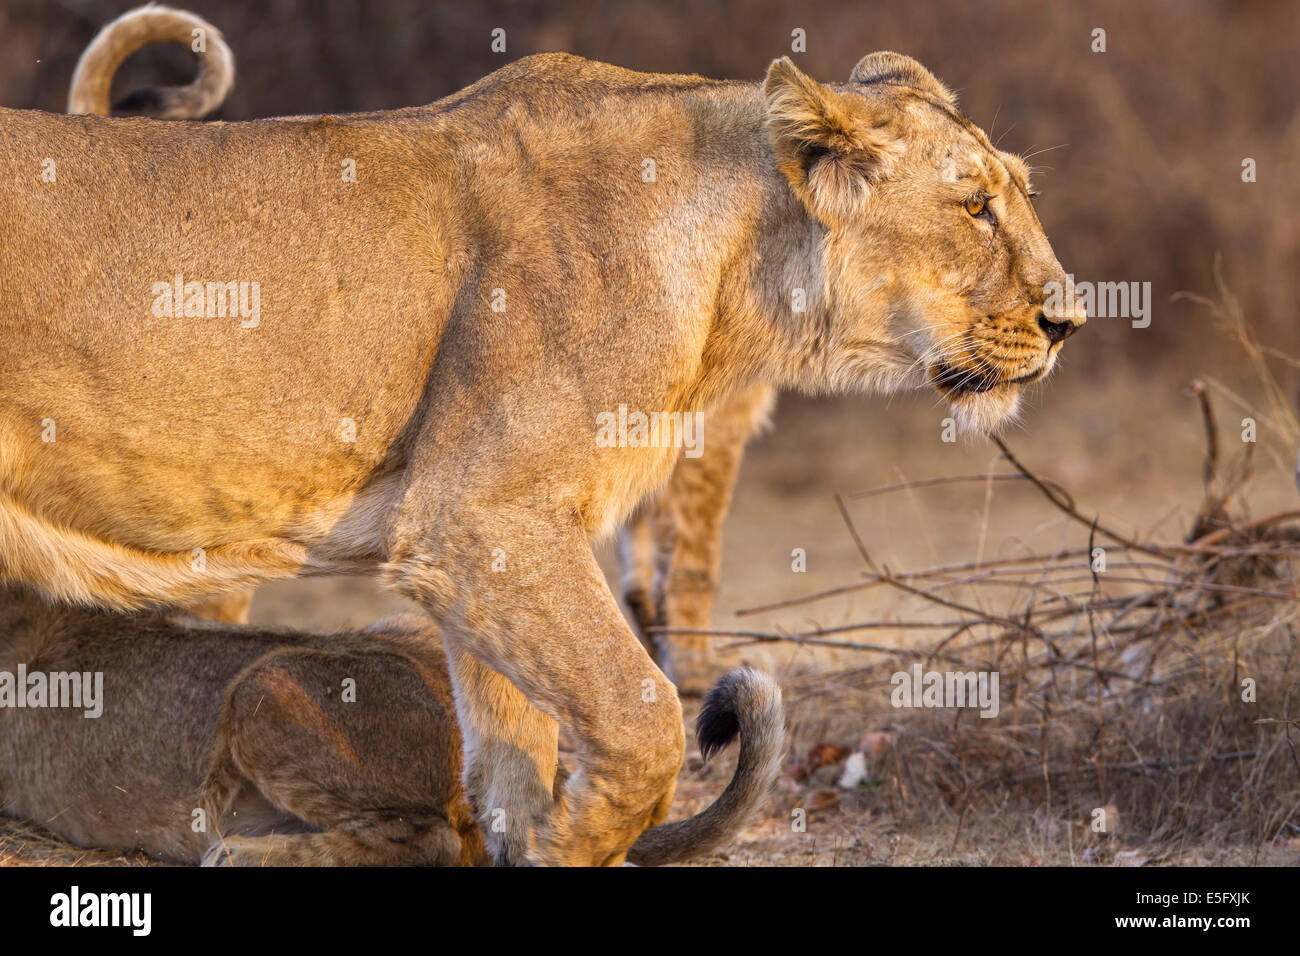 Asiatic Lioness (Panthera leo persica) at Gir forest, Gujarat, India. Stock Photo